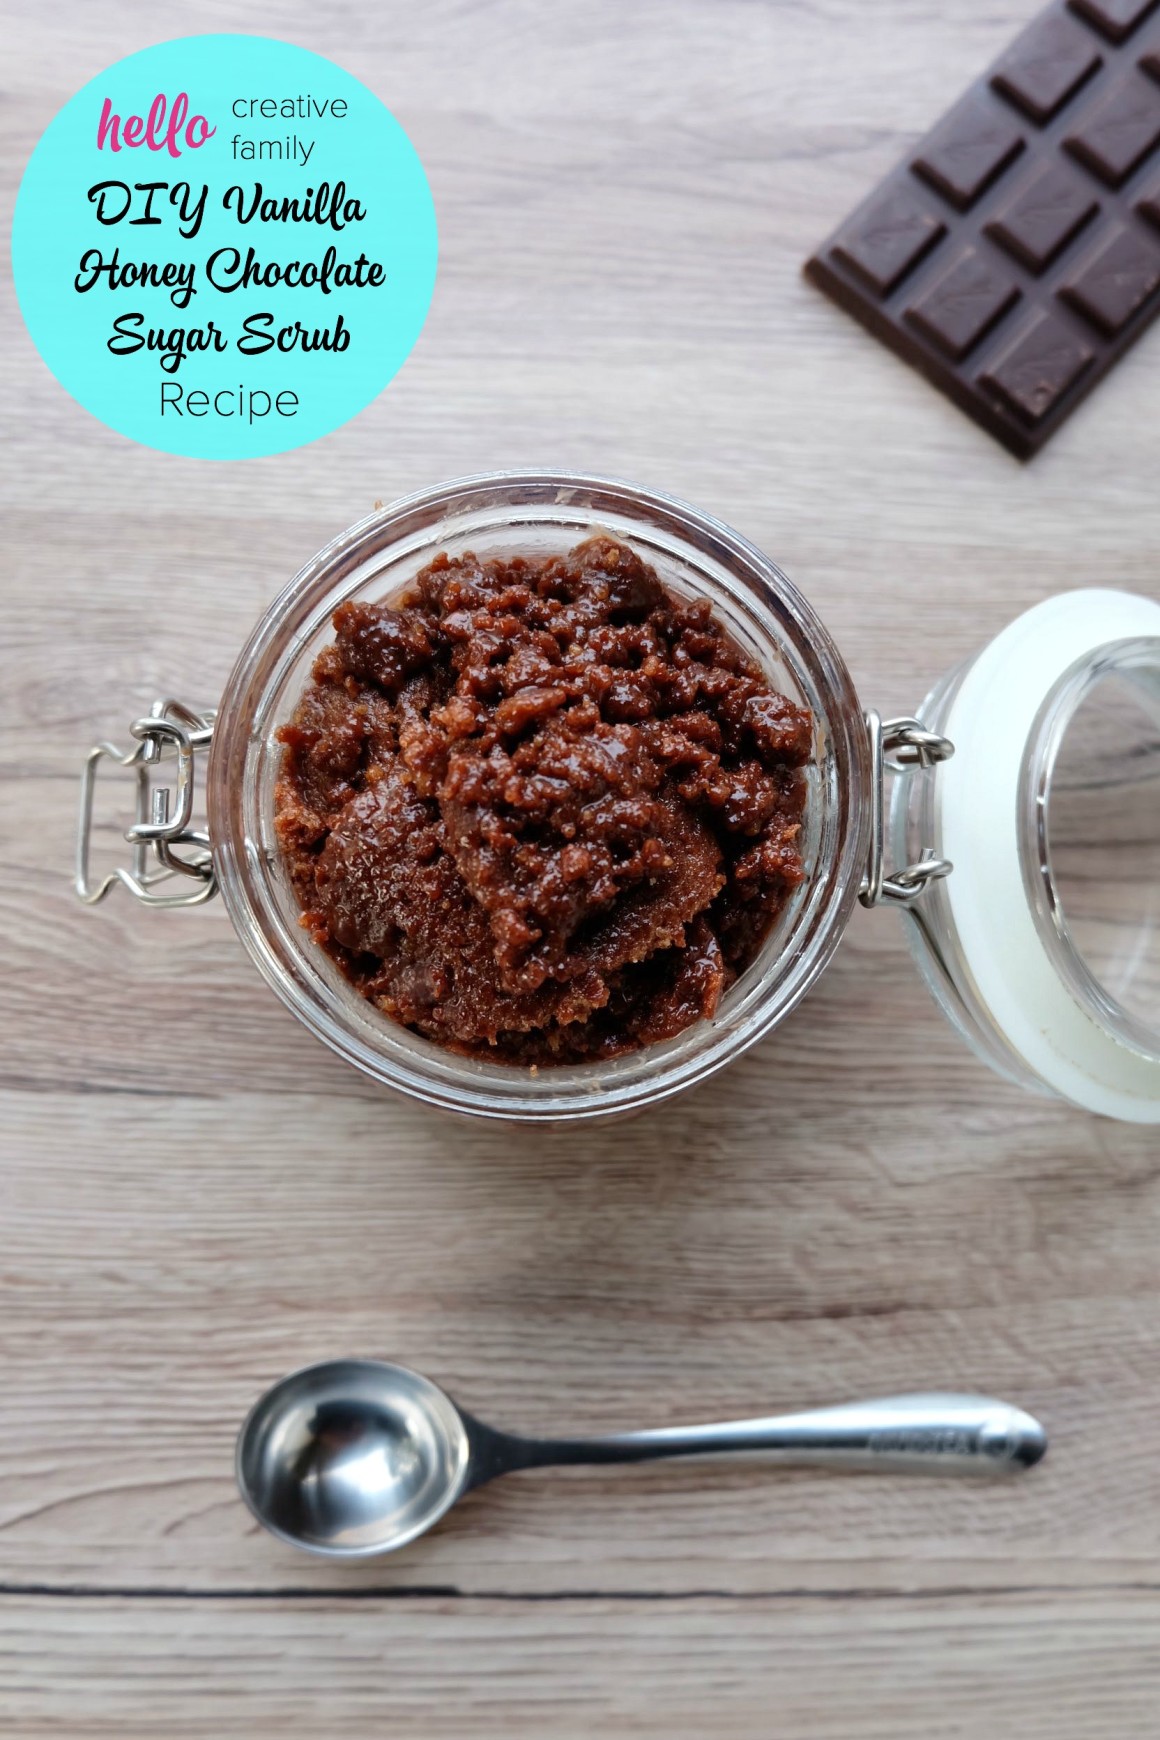 Filled with the moisturizing and anti-bacterial properties of coconut oil, olive oil and honey and the exfoliating effect of brown sugar, this DIY Vanilla Honey Chocolate Sugar Scrub Recipe will leave your skin moisturized, exfoliated and glowing! Use all over your body in the shower, on your hands and feet during manicures and pedicures and even on your face for a natural exfoliating face wash! Say bye bye micro-beads with this all natural DIY body product recipe!